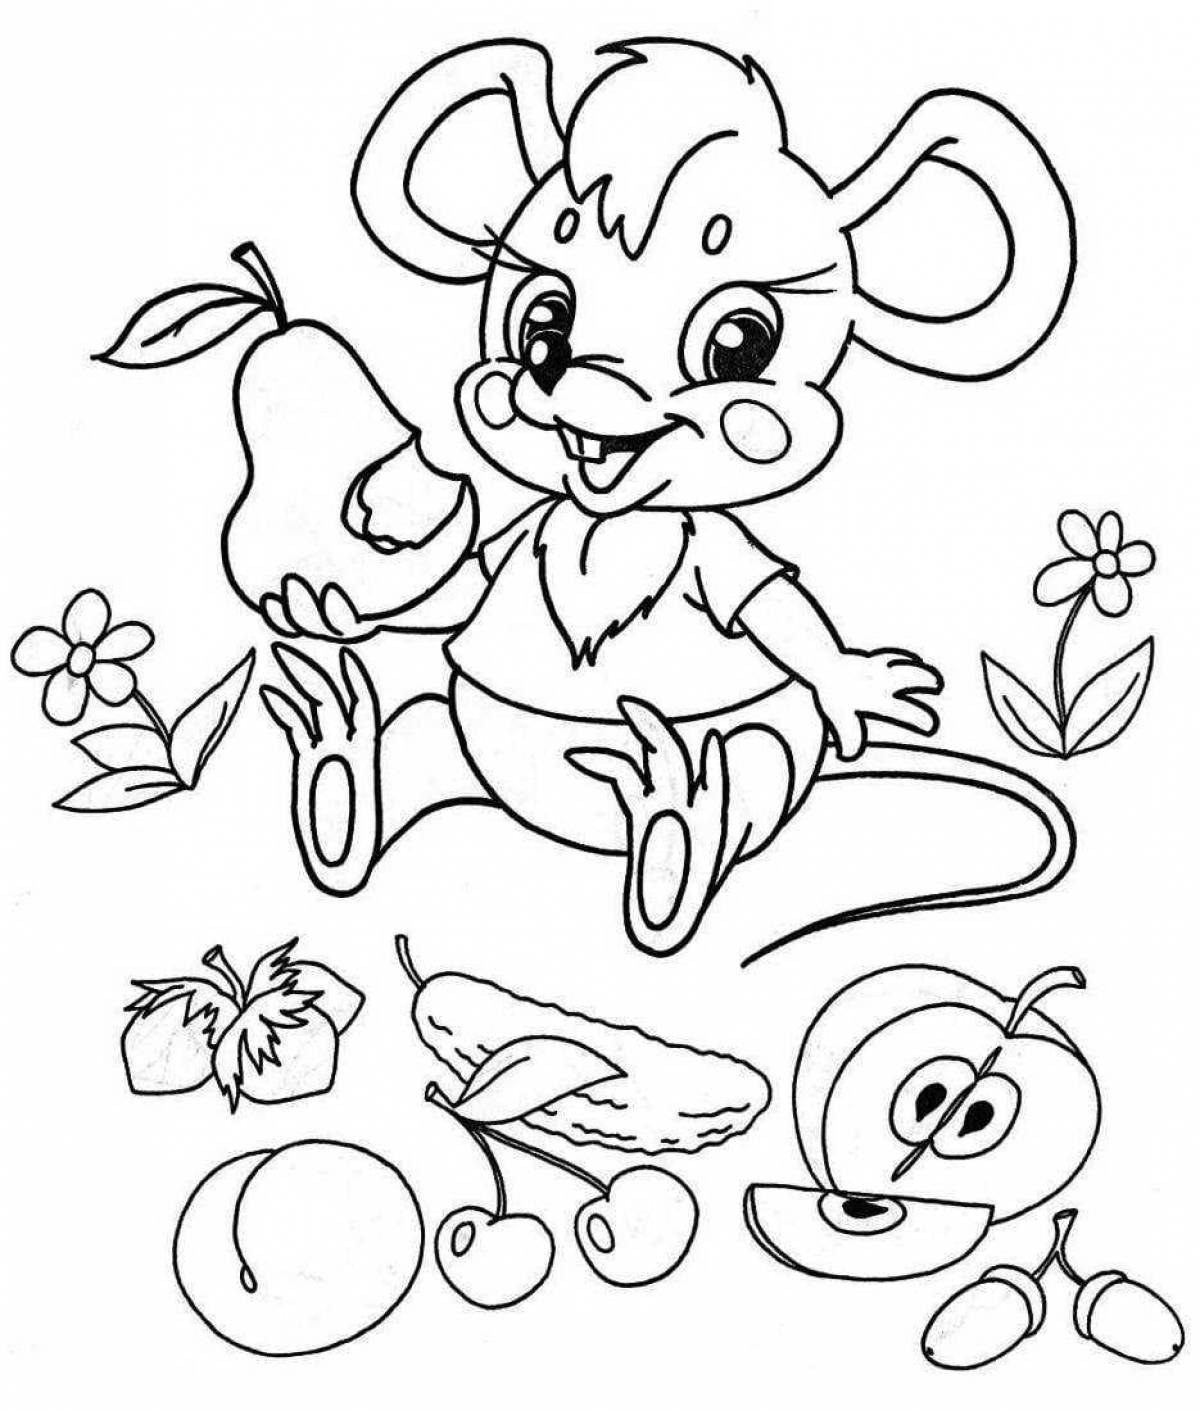 Color-happy coloring page for kids 5-6 years old